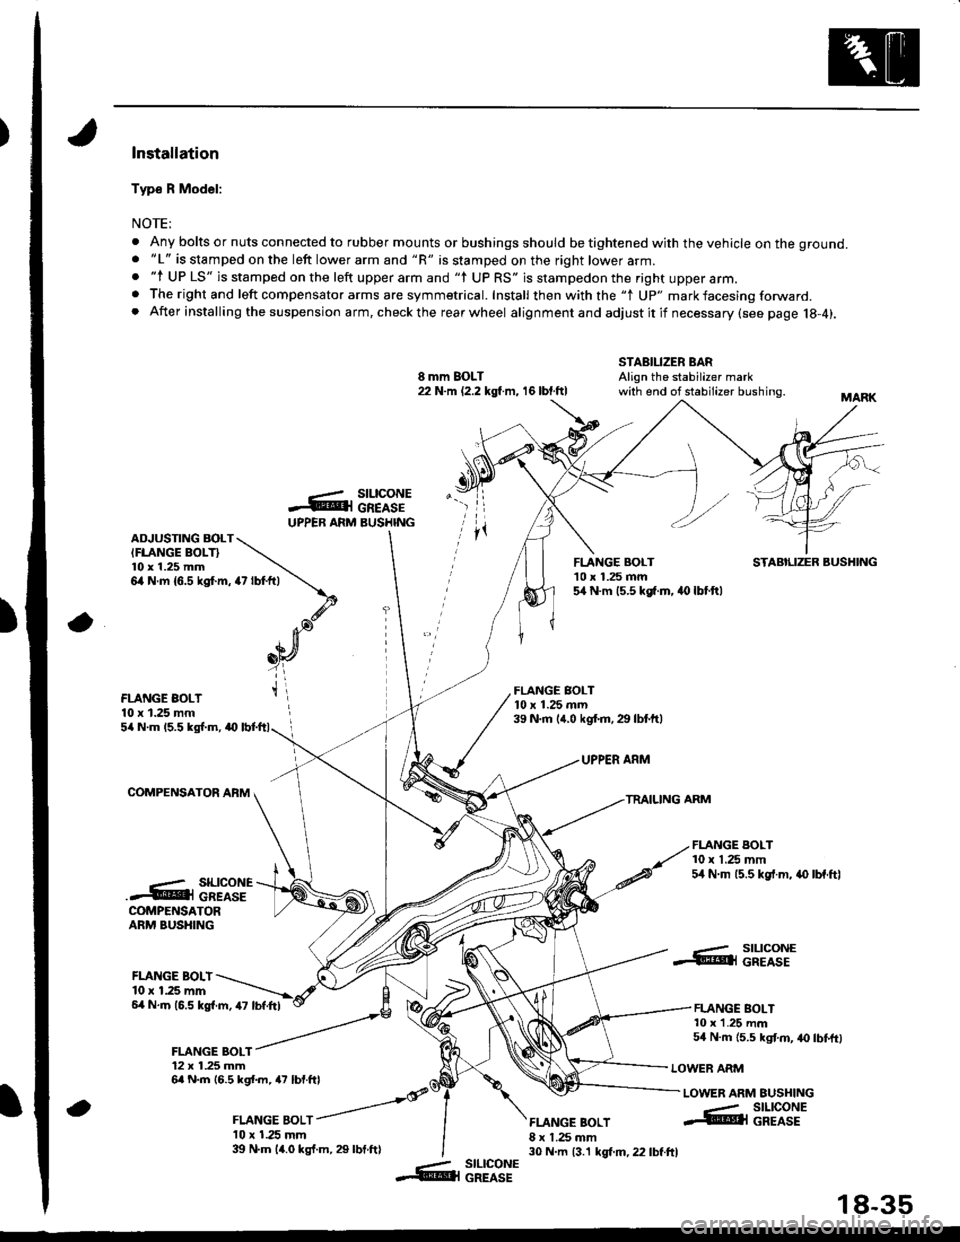 HONDA INTEGRA 1998 4.G Workshop Manual )Installation
Typ€ R Model:
NOTE;
. Any bolts or nuts connected to rubber mounts or bushings should be tightened with the vehicle on the ground.. "L" is stamped on the left lower arm and "R" is stam